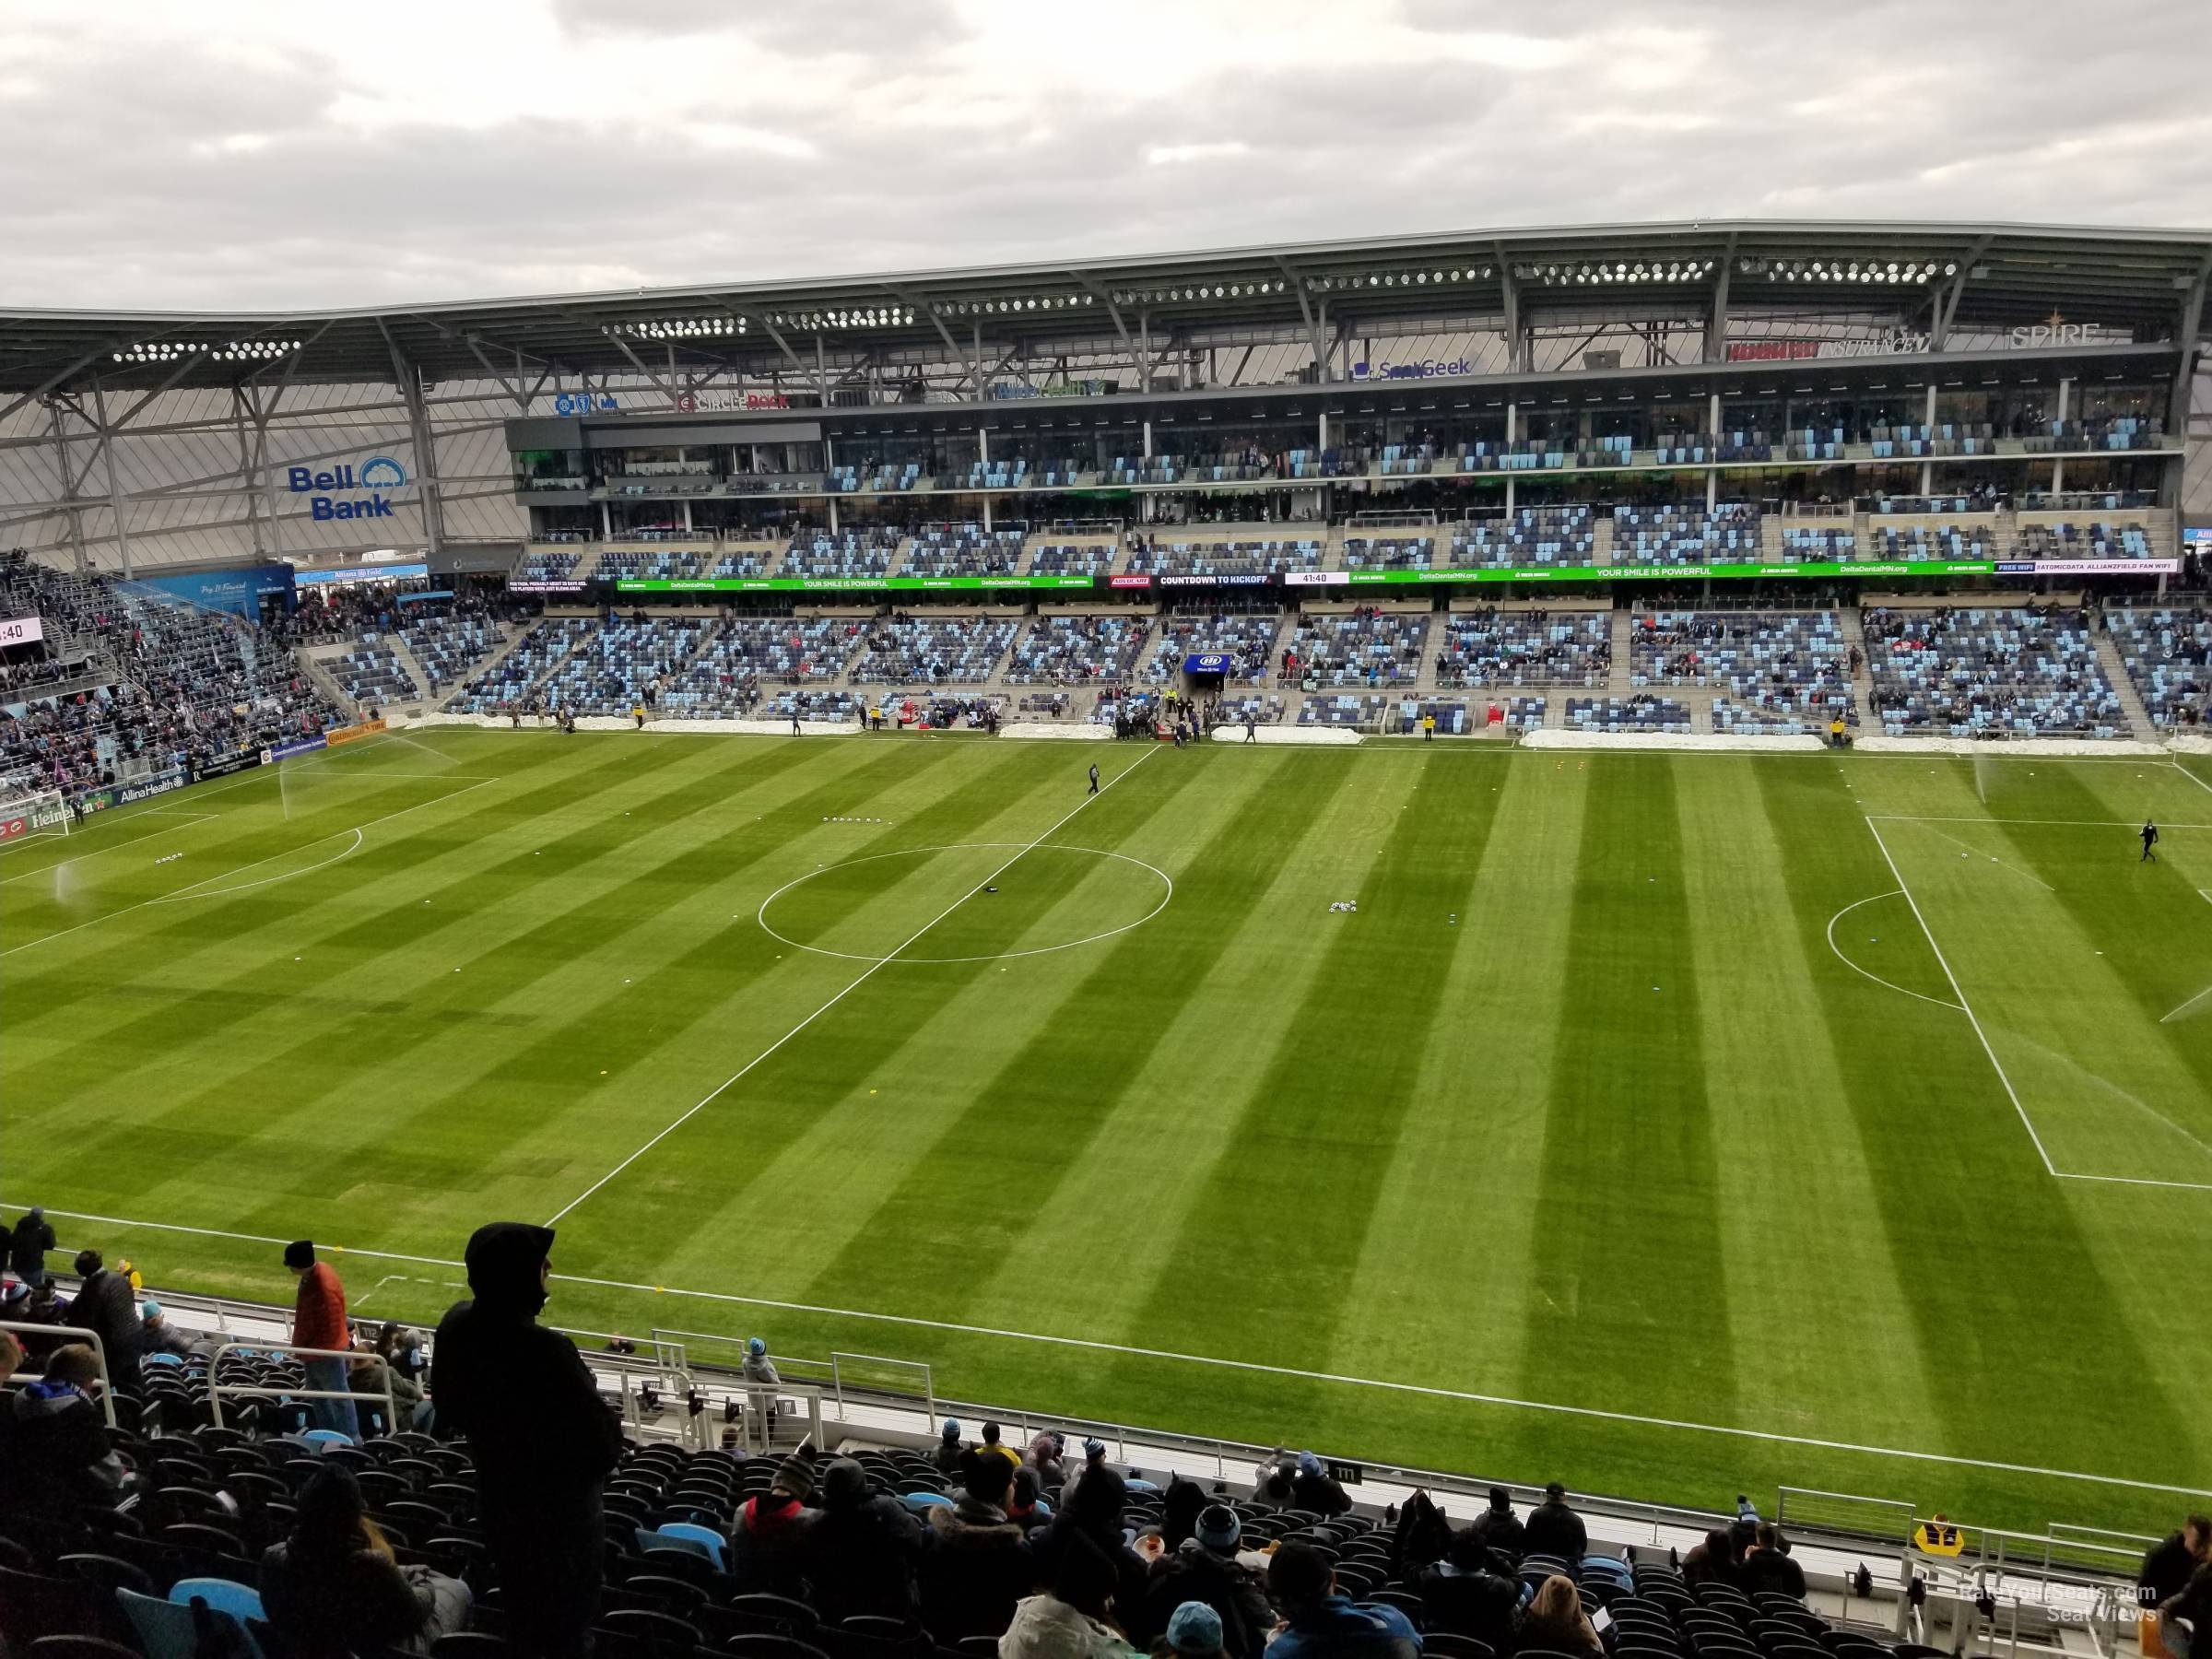 section 111, row 21 seat view  - allianz field